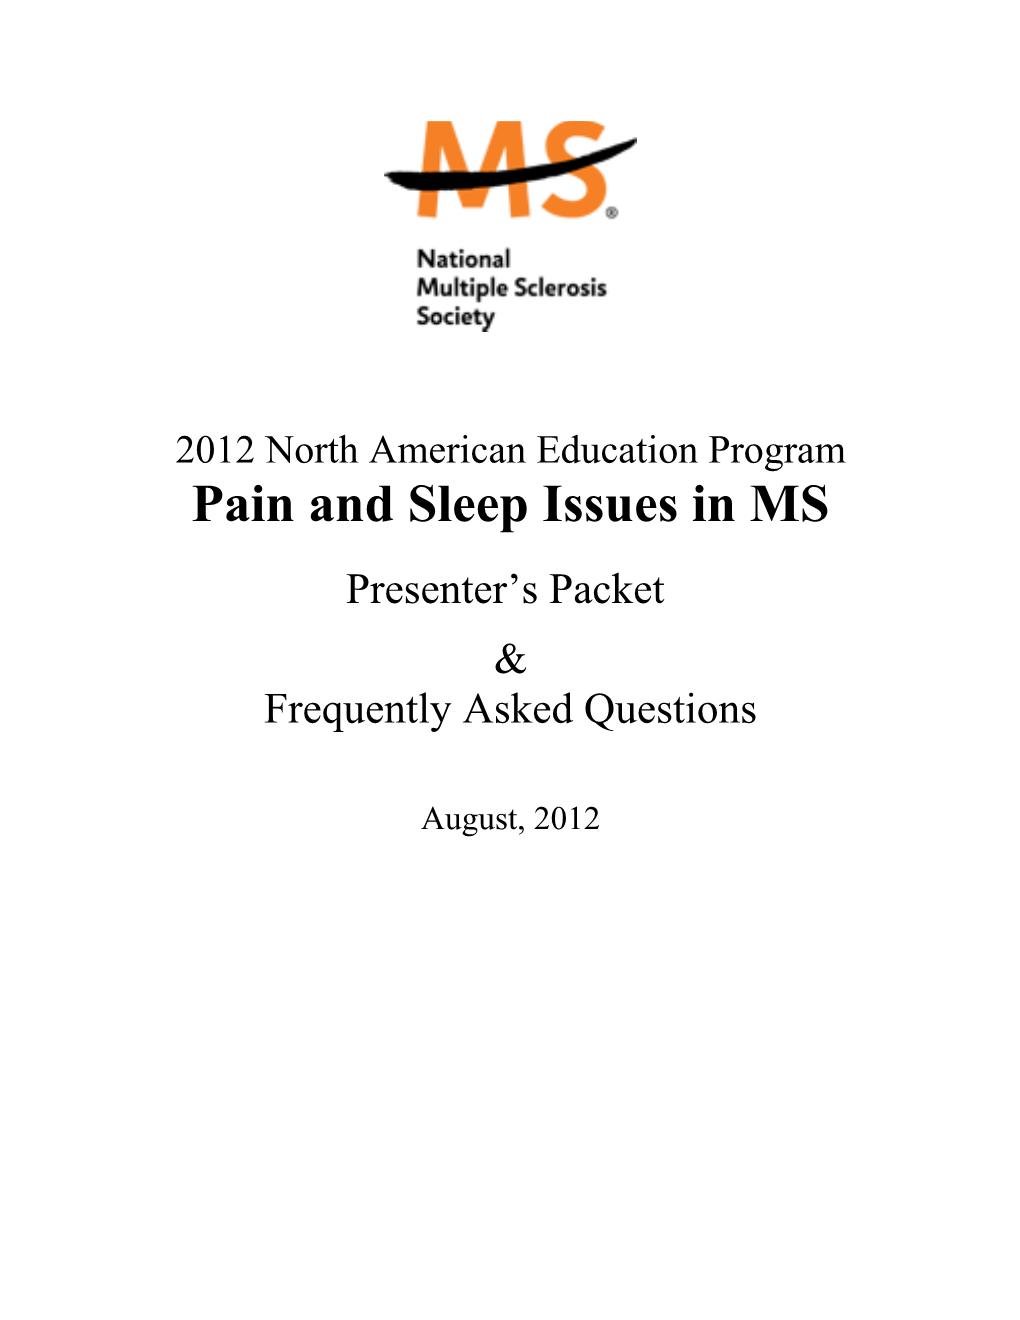 Pain and Sleep Issues in MS